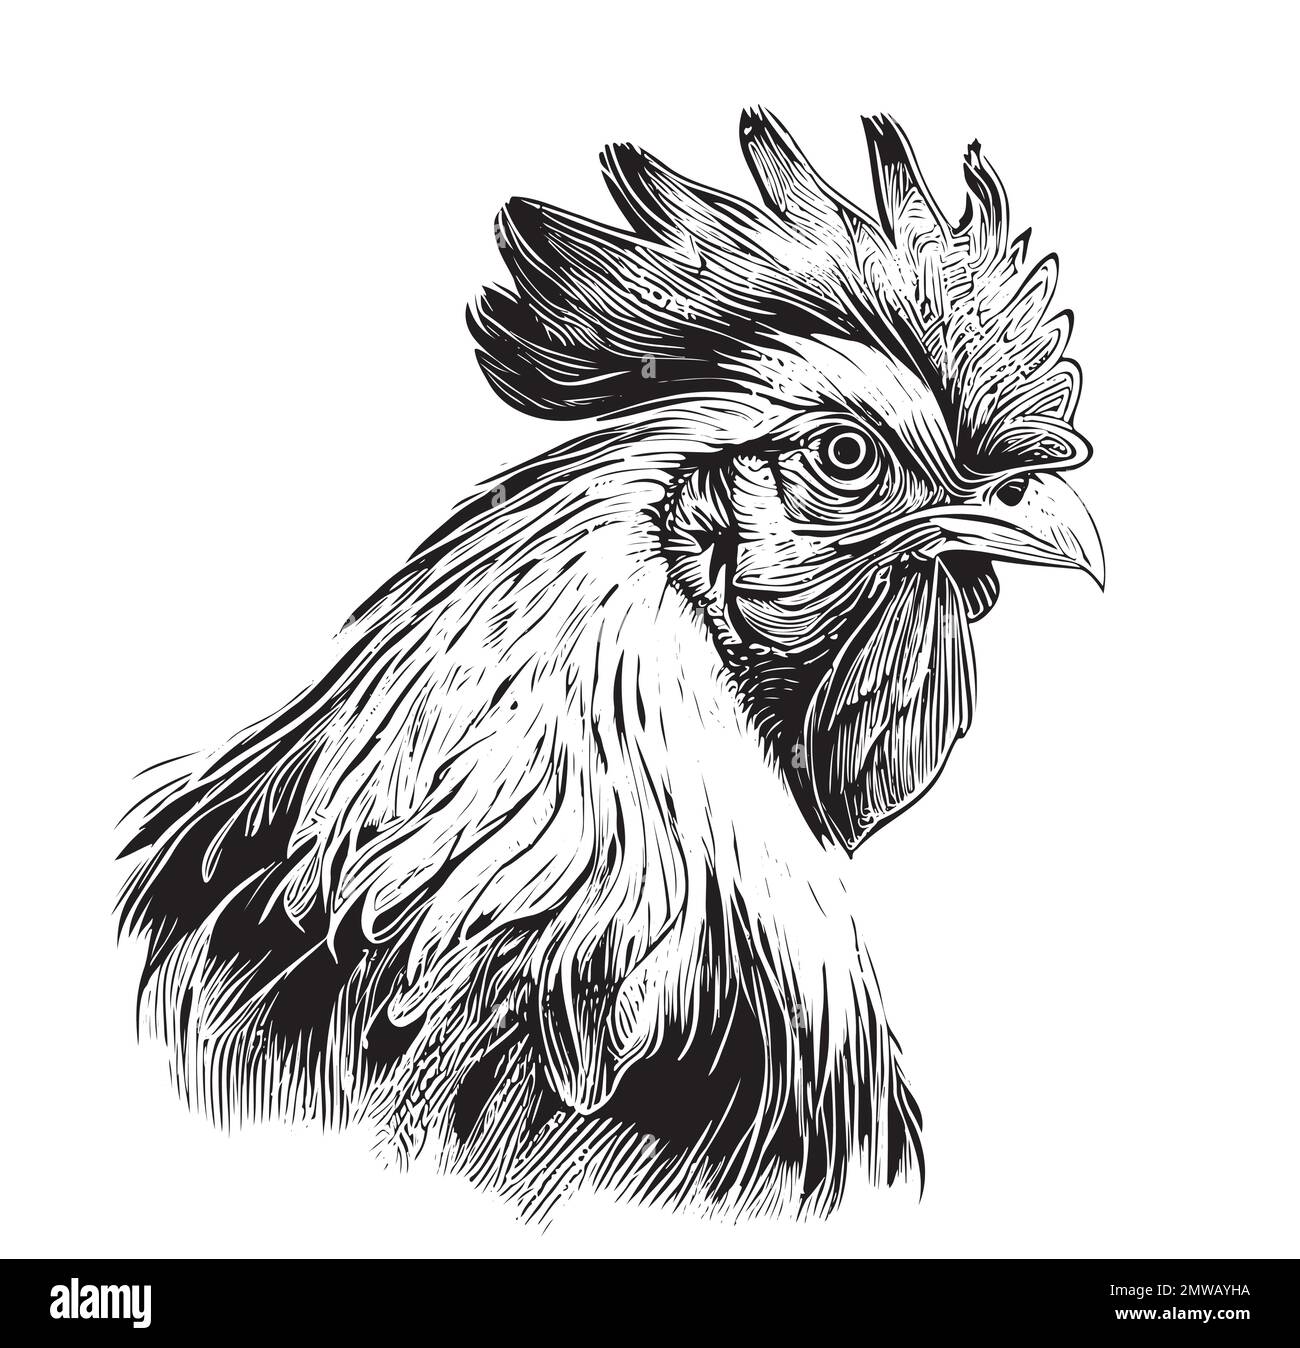 Pencil Drawing Of A Chicken S Head Background Picture Of Chicken Drawing  Background Image And Wallpaper for Free Download